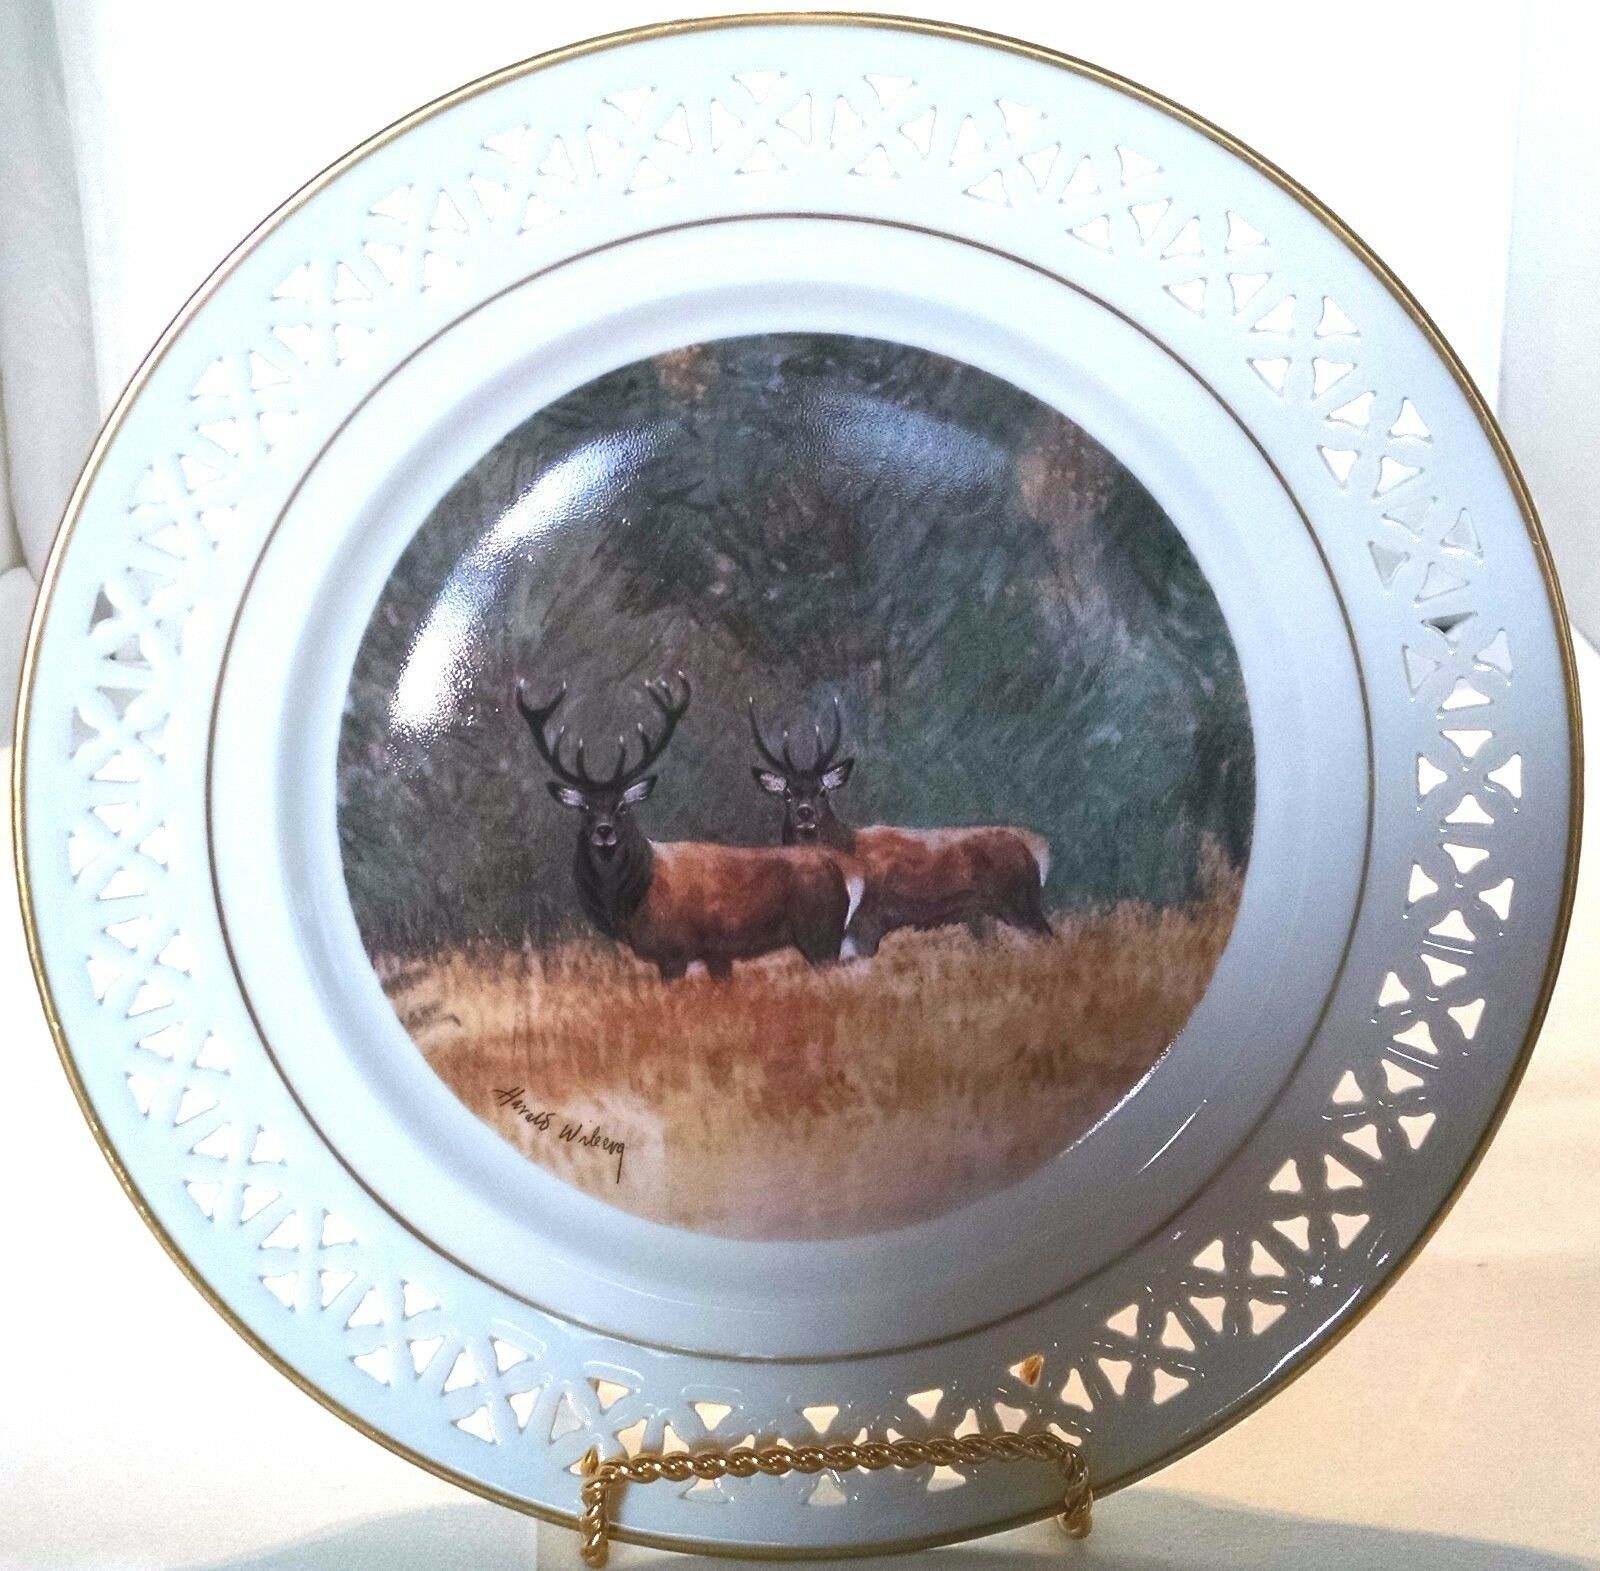 Primary image for Deer Collector Plate Bing and Grondahl Swedish Artist Harald Wiberg